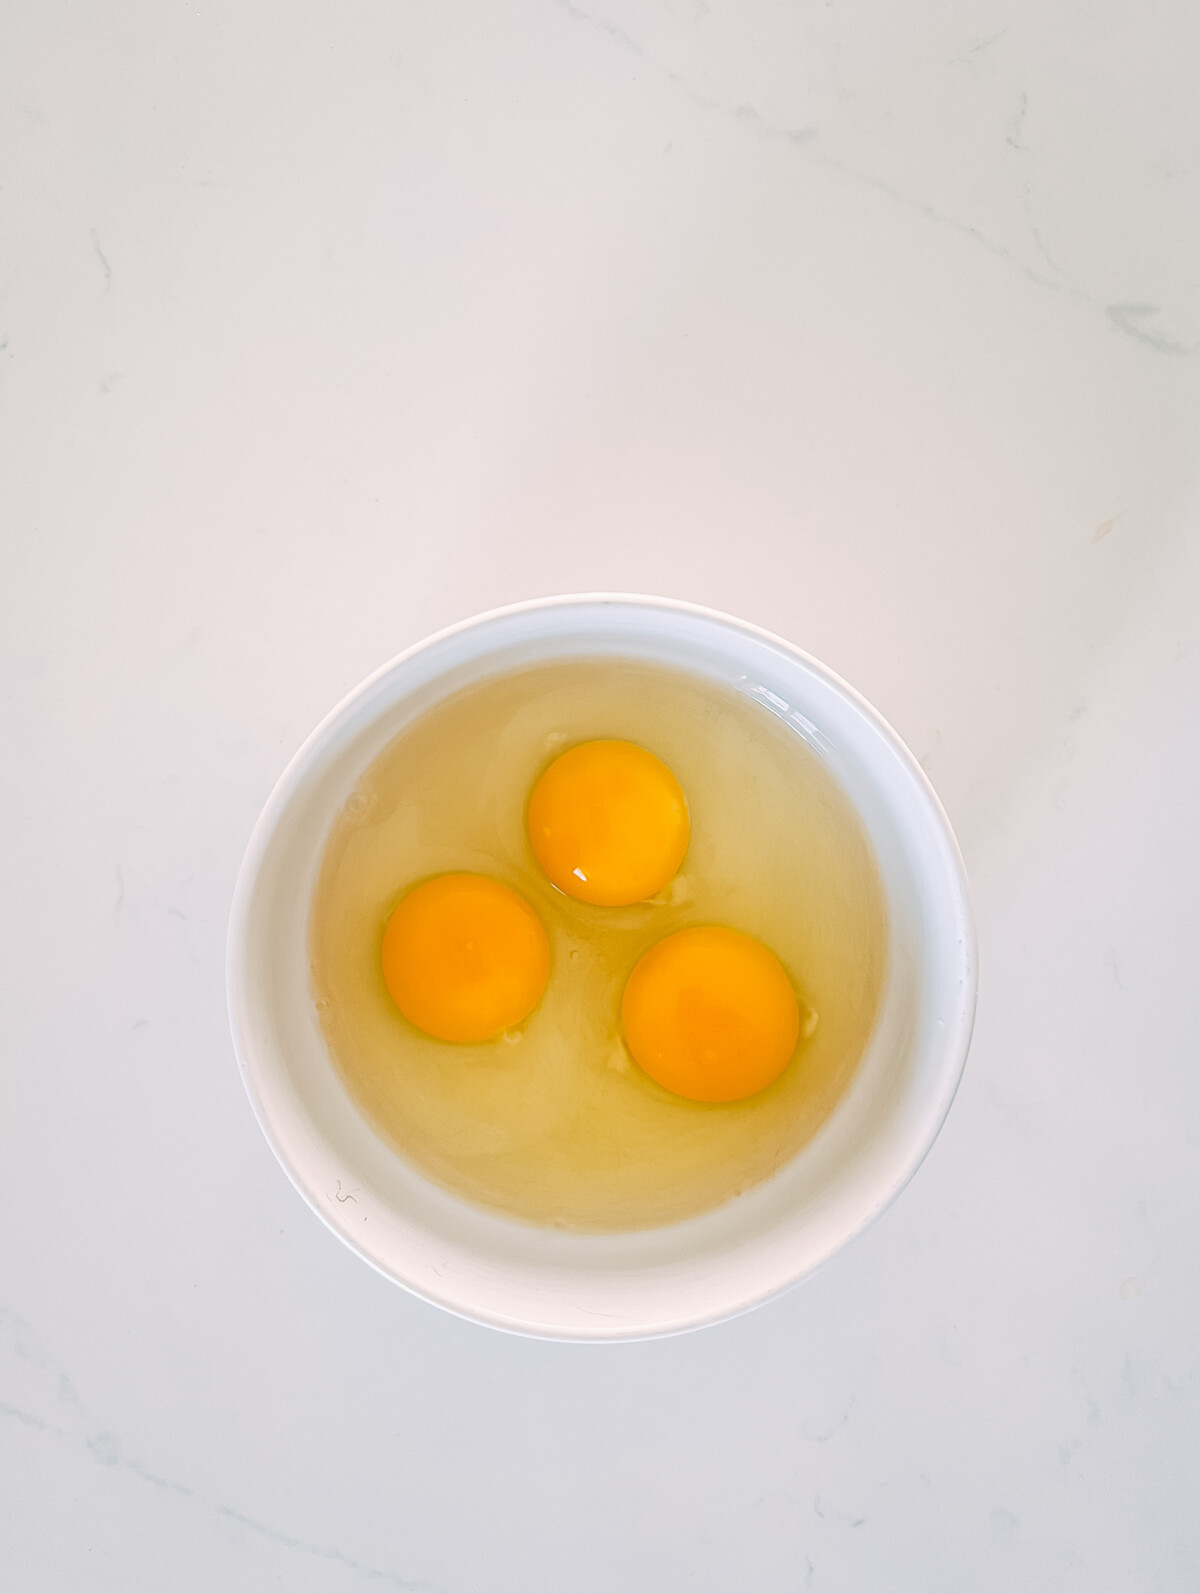 3 eggs in a bowl.